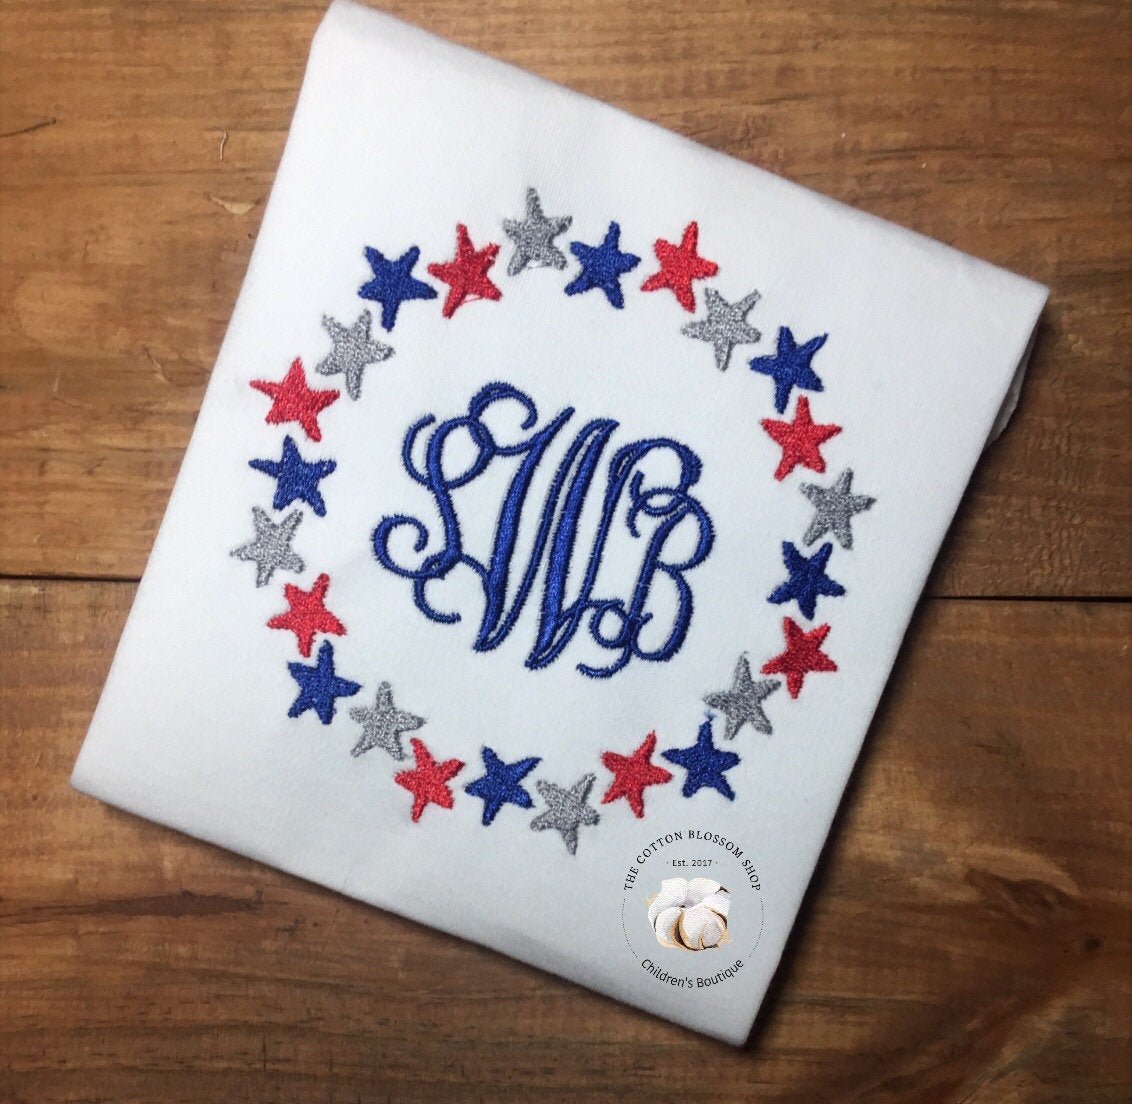 4th of July Monogrammed Girl's Shirt - monogrammed star shirt, embroidered shirt